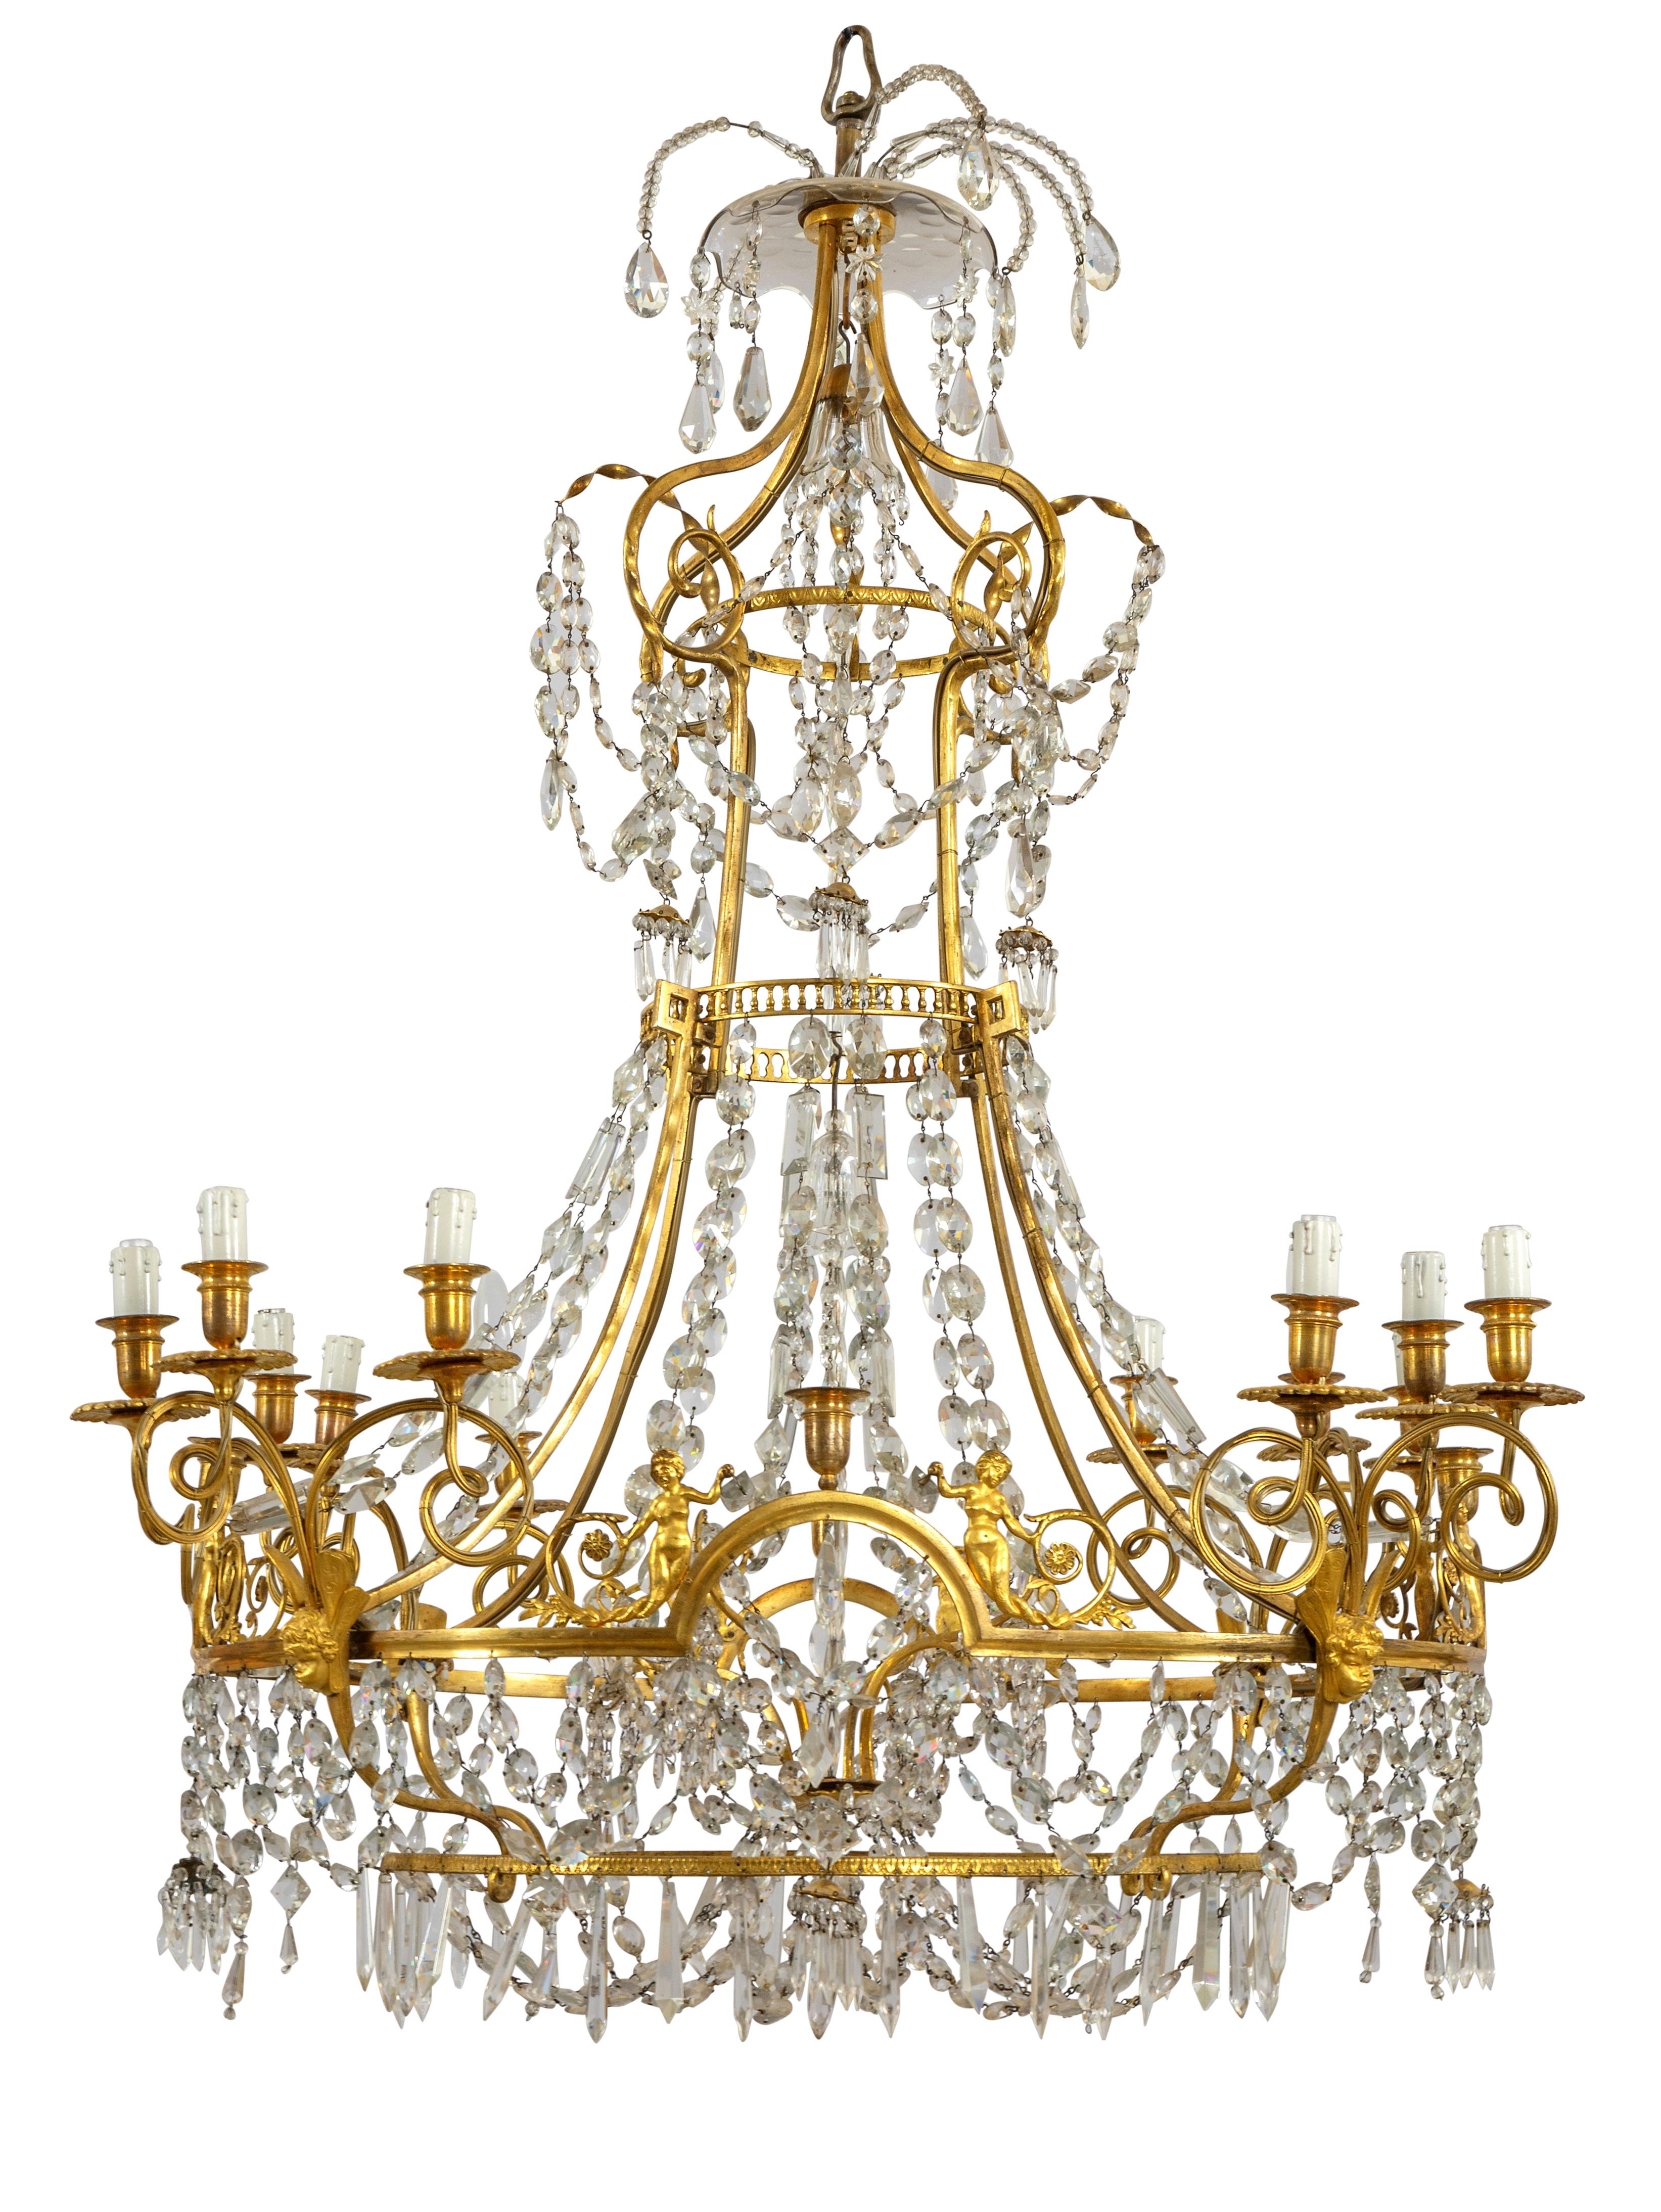 19th Century, Large French Gilt Bronze and Crystal Chandelier with Twelve Lights

This elegant and refined chandelier was made in France in the early nineteenth century.
The structure is in finely chiselled gilded bronze, adorned with a rich crystal